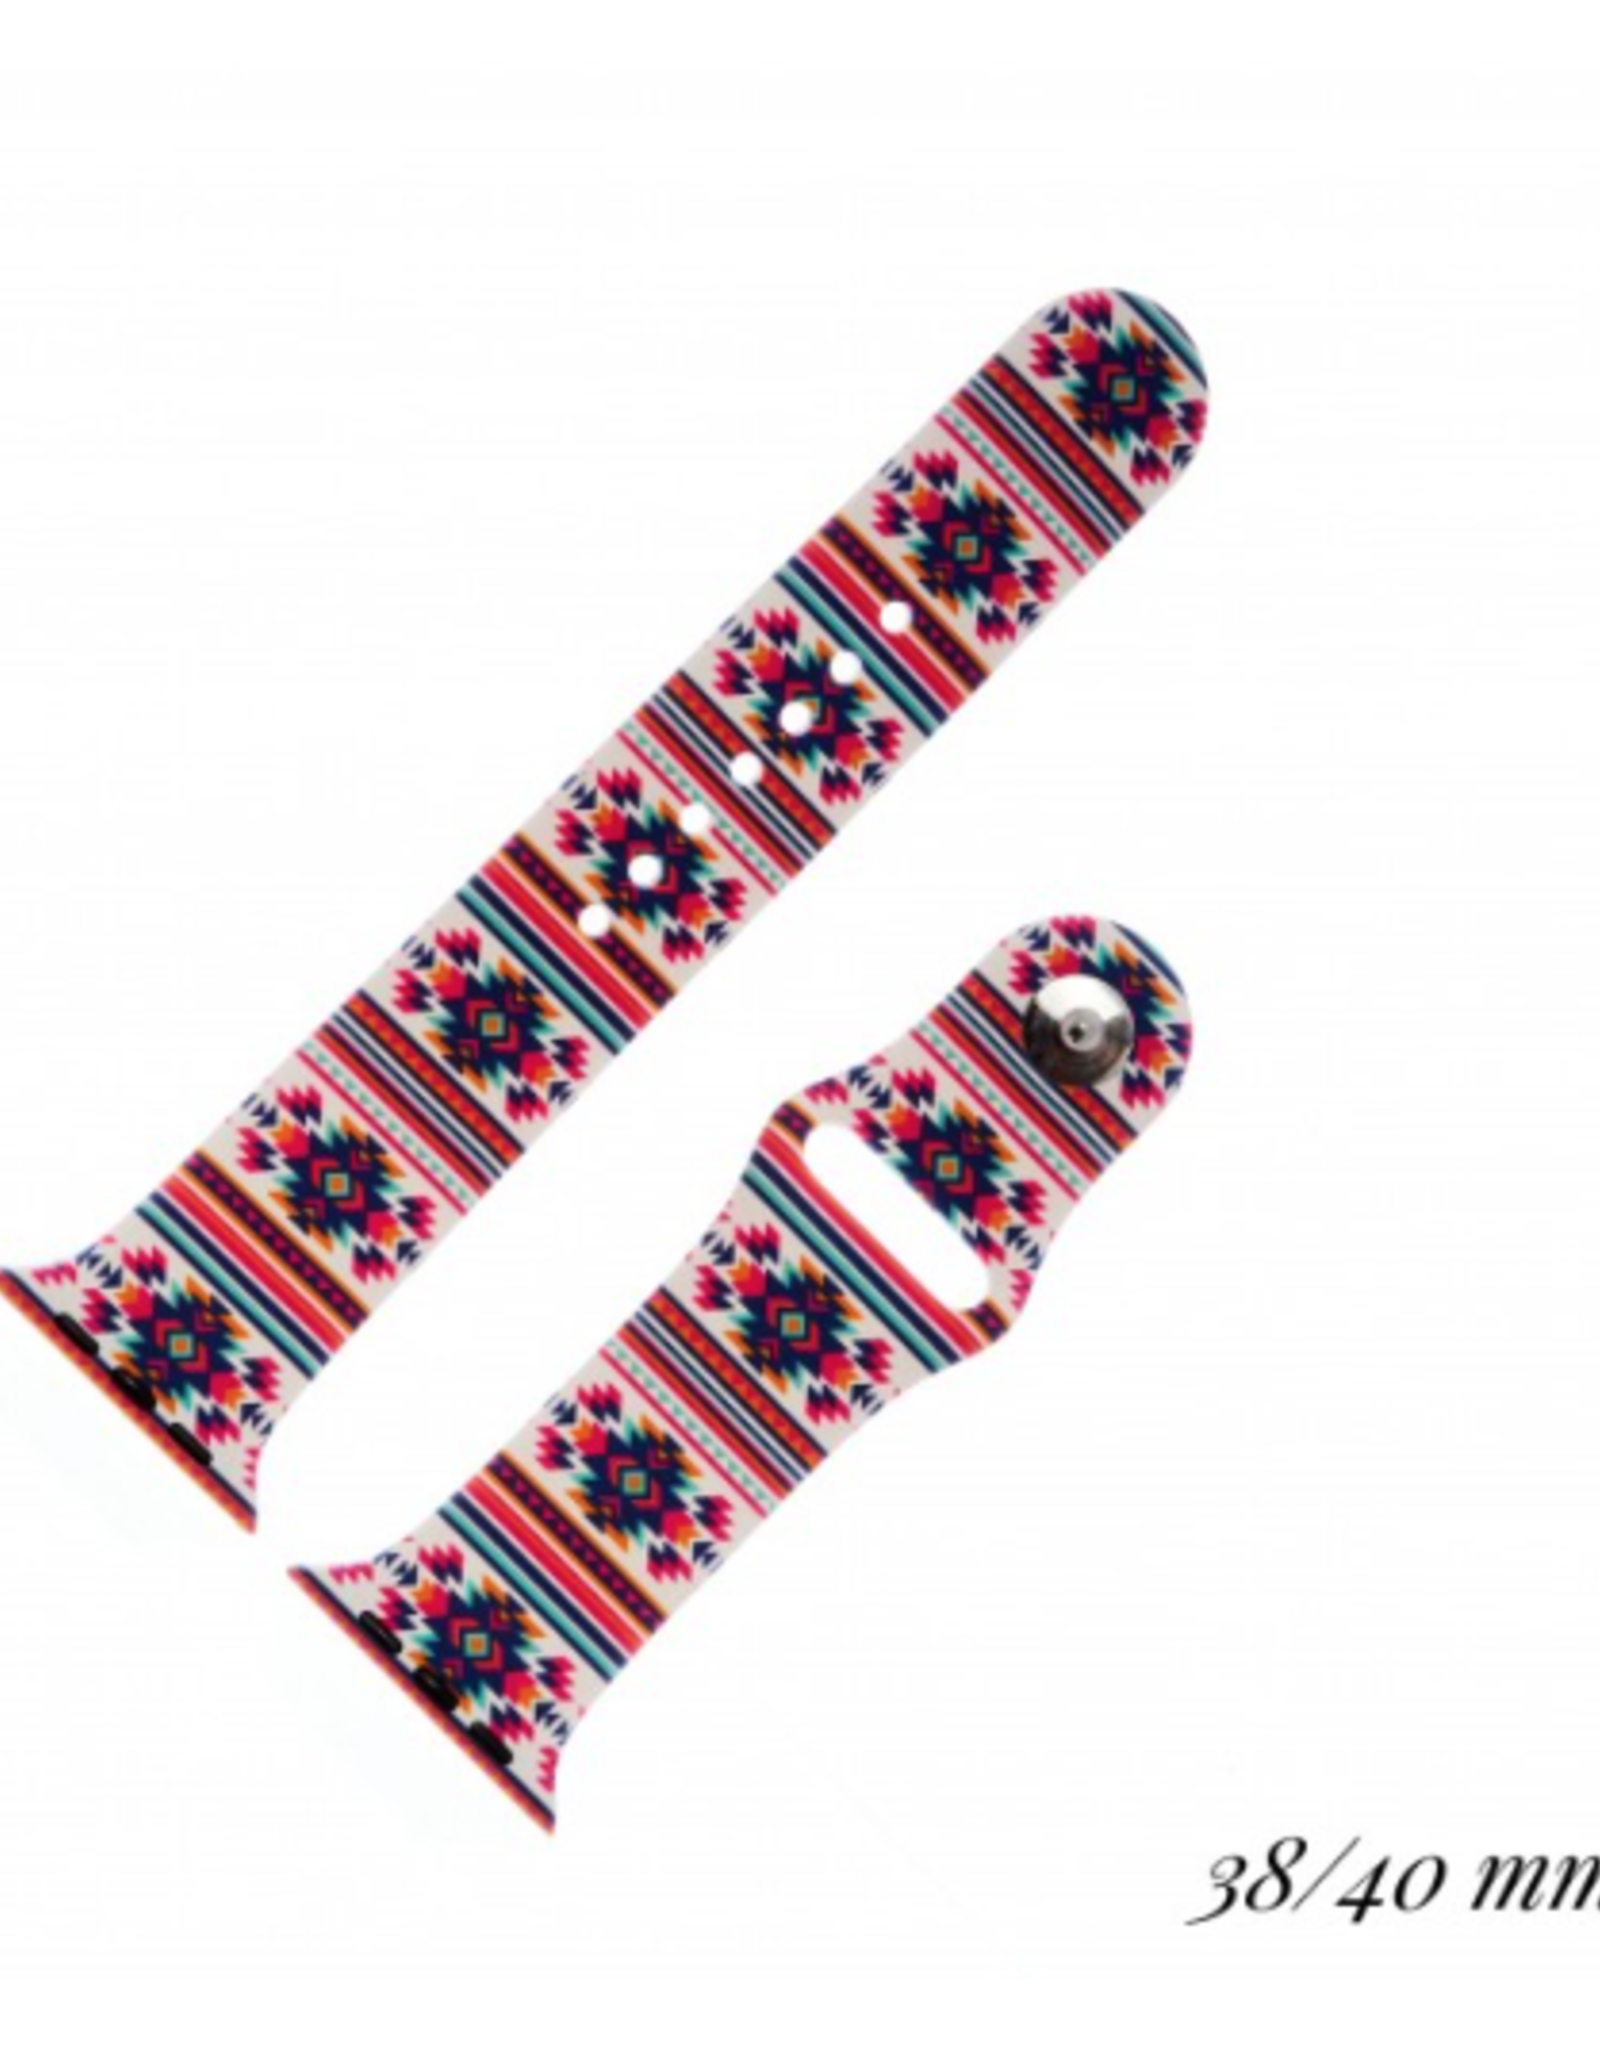 WATCH INTERCHANGEABLE SILICONE SMART WATCH BAND